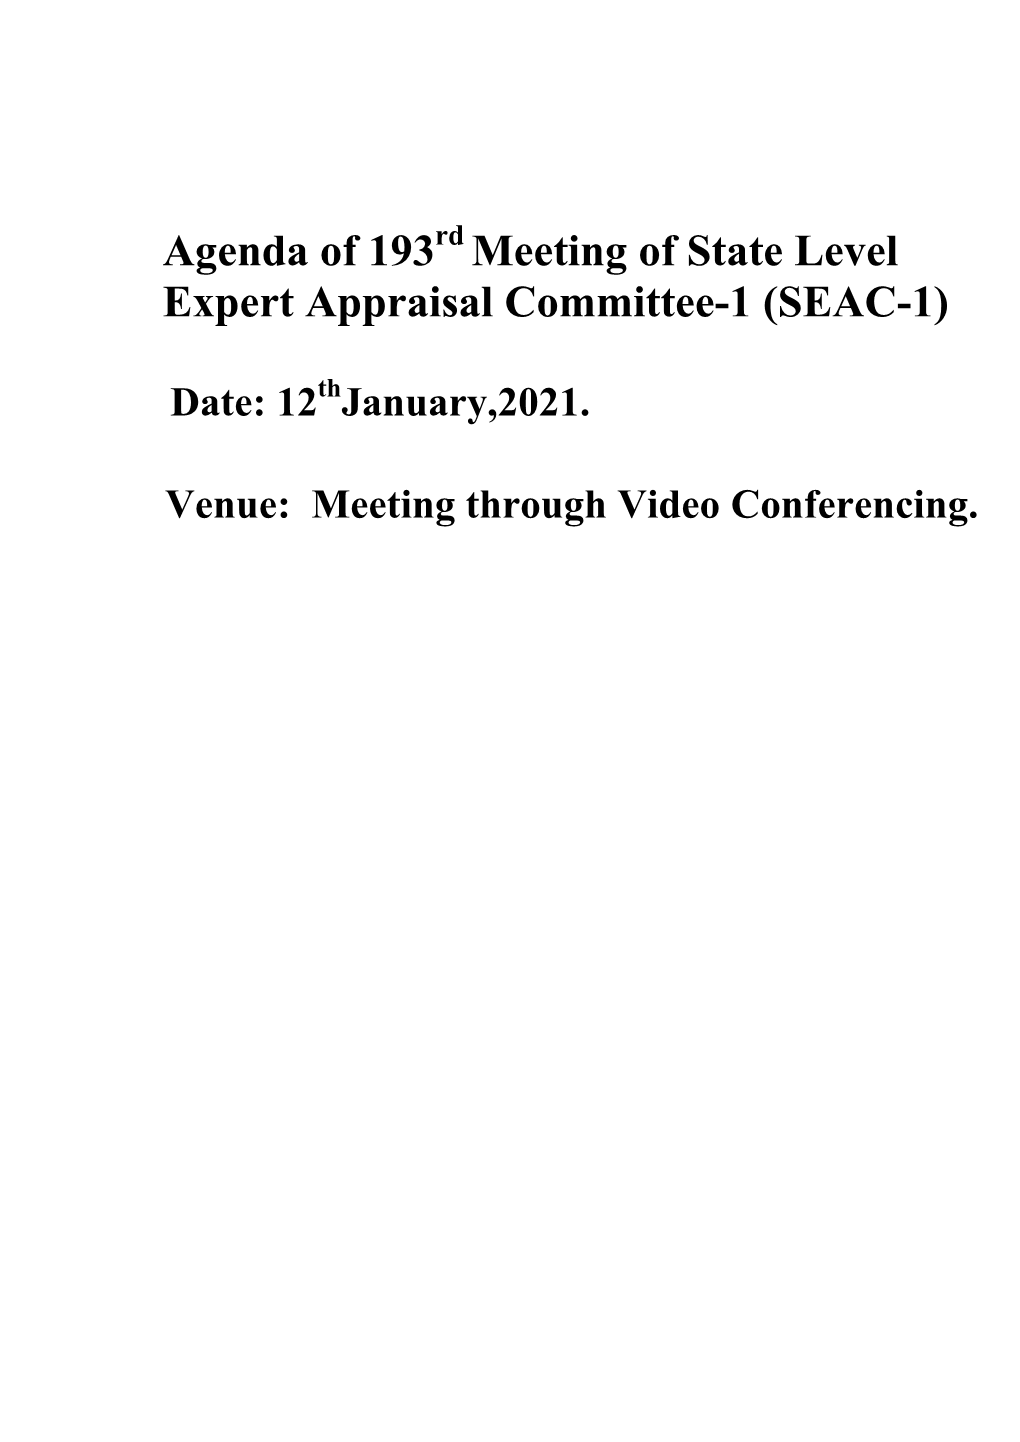 Agenda of 193 Meeting of State Level Expert Appraisal Committee-1 (SEAC-1)